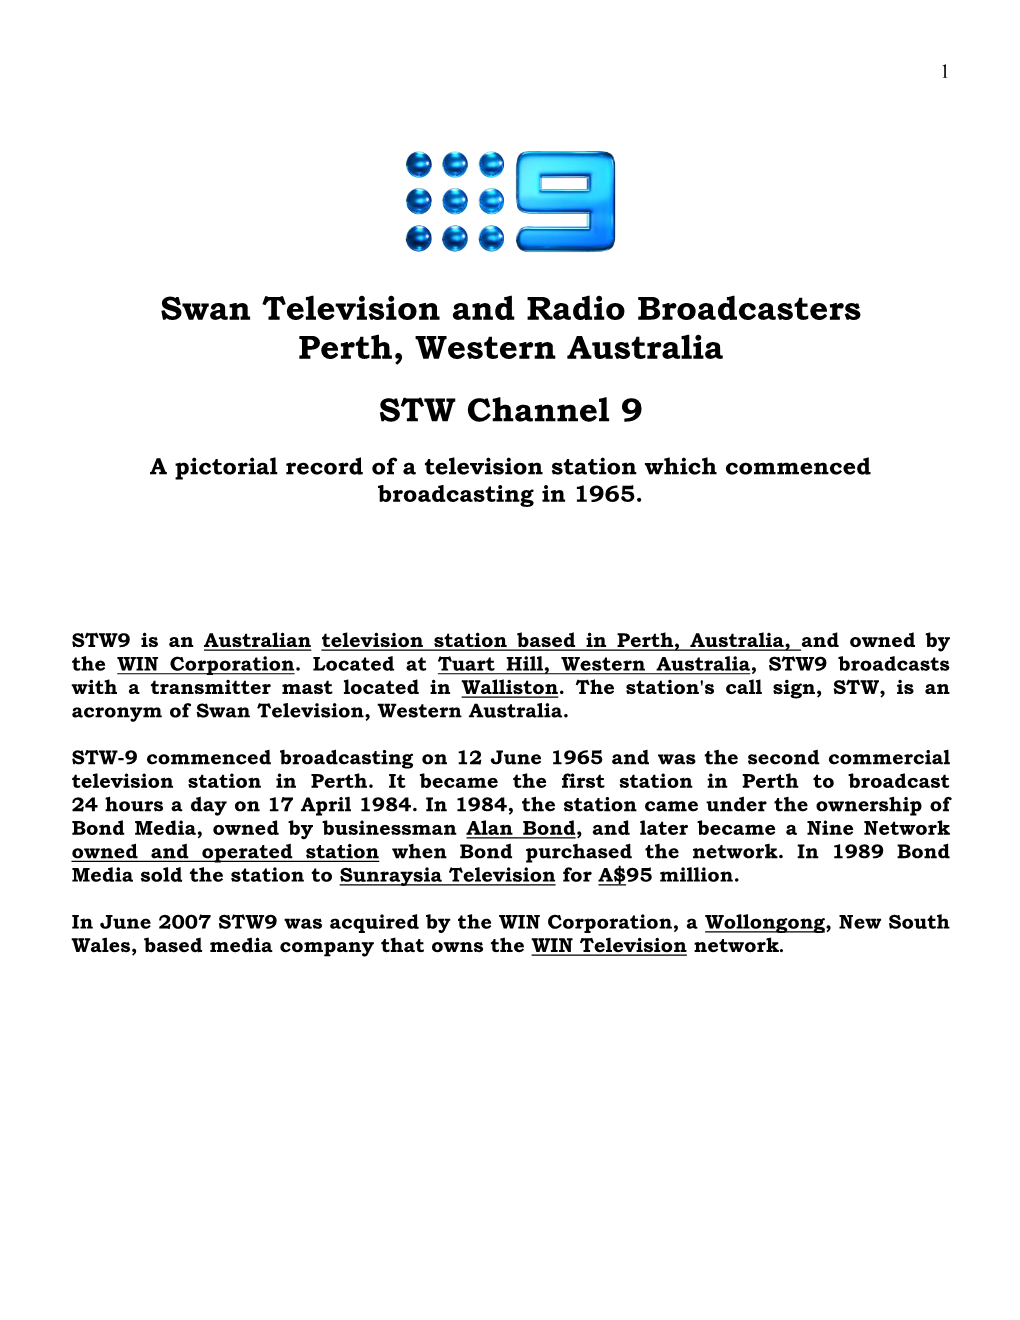 Swan Television and Radio Broadcasters Perth, Western Australia STW Channel 9